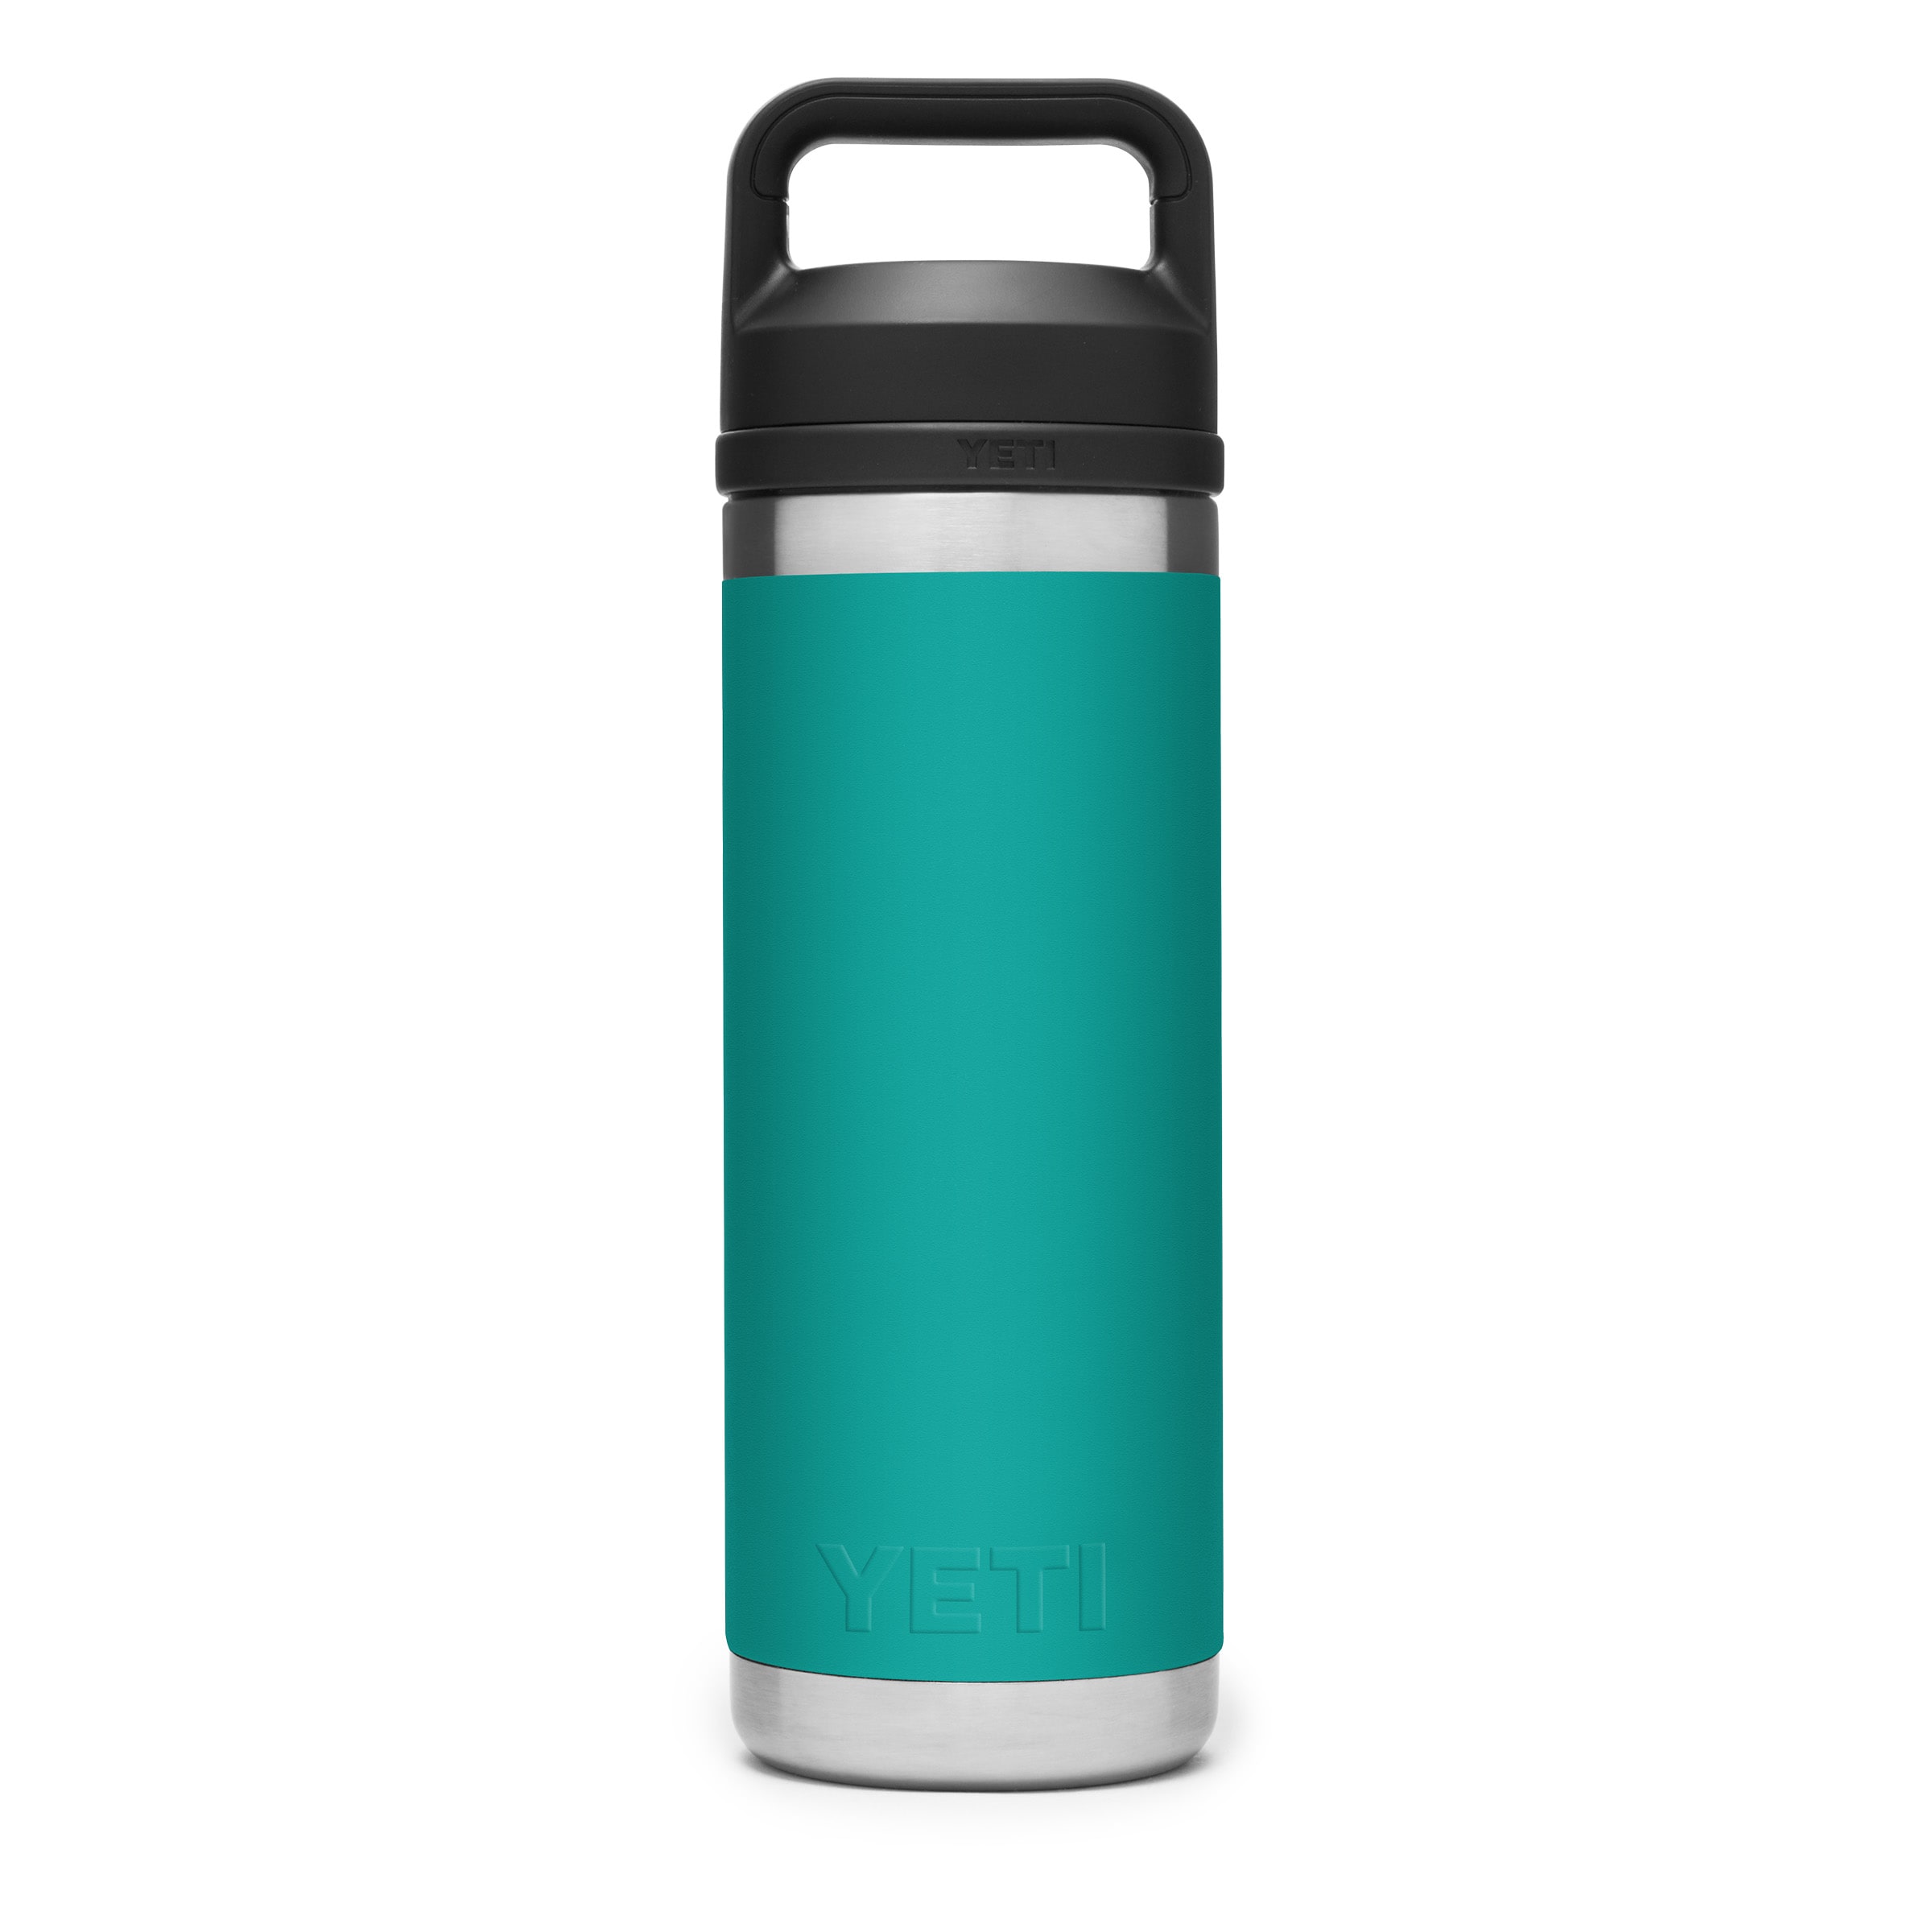 Sports Water Bottle With Straw, 1l/2l Water Bottles With Marker & Leakproof  Lid & No Sweat Handle Bottle